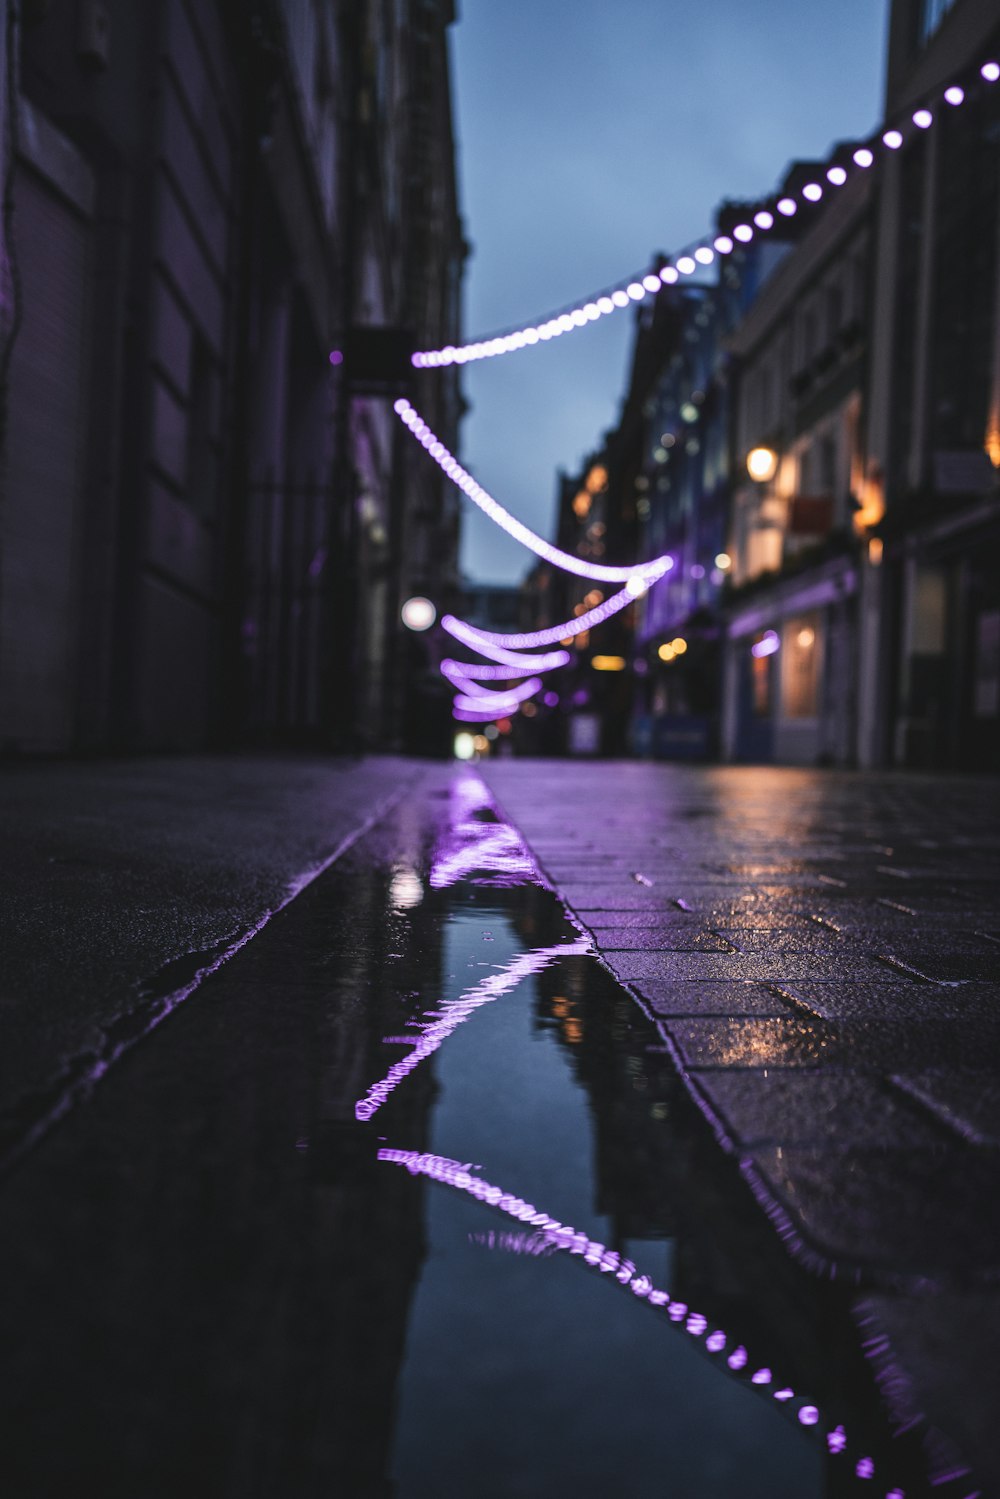 purple and blue string lights on road during night time